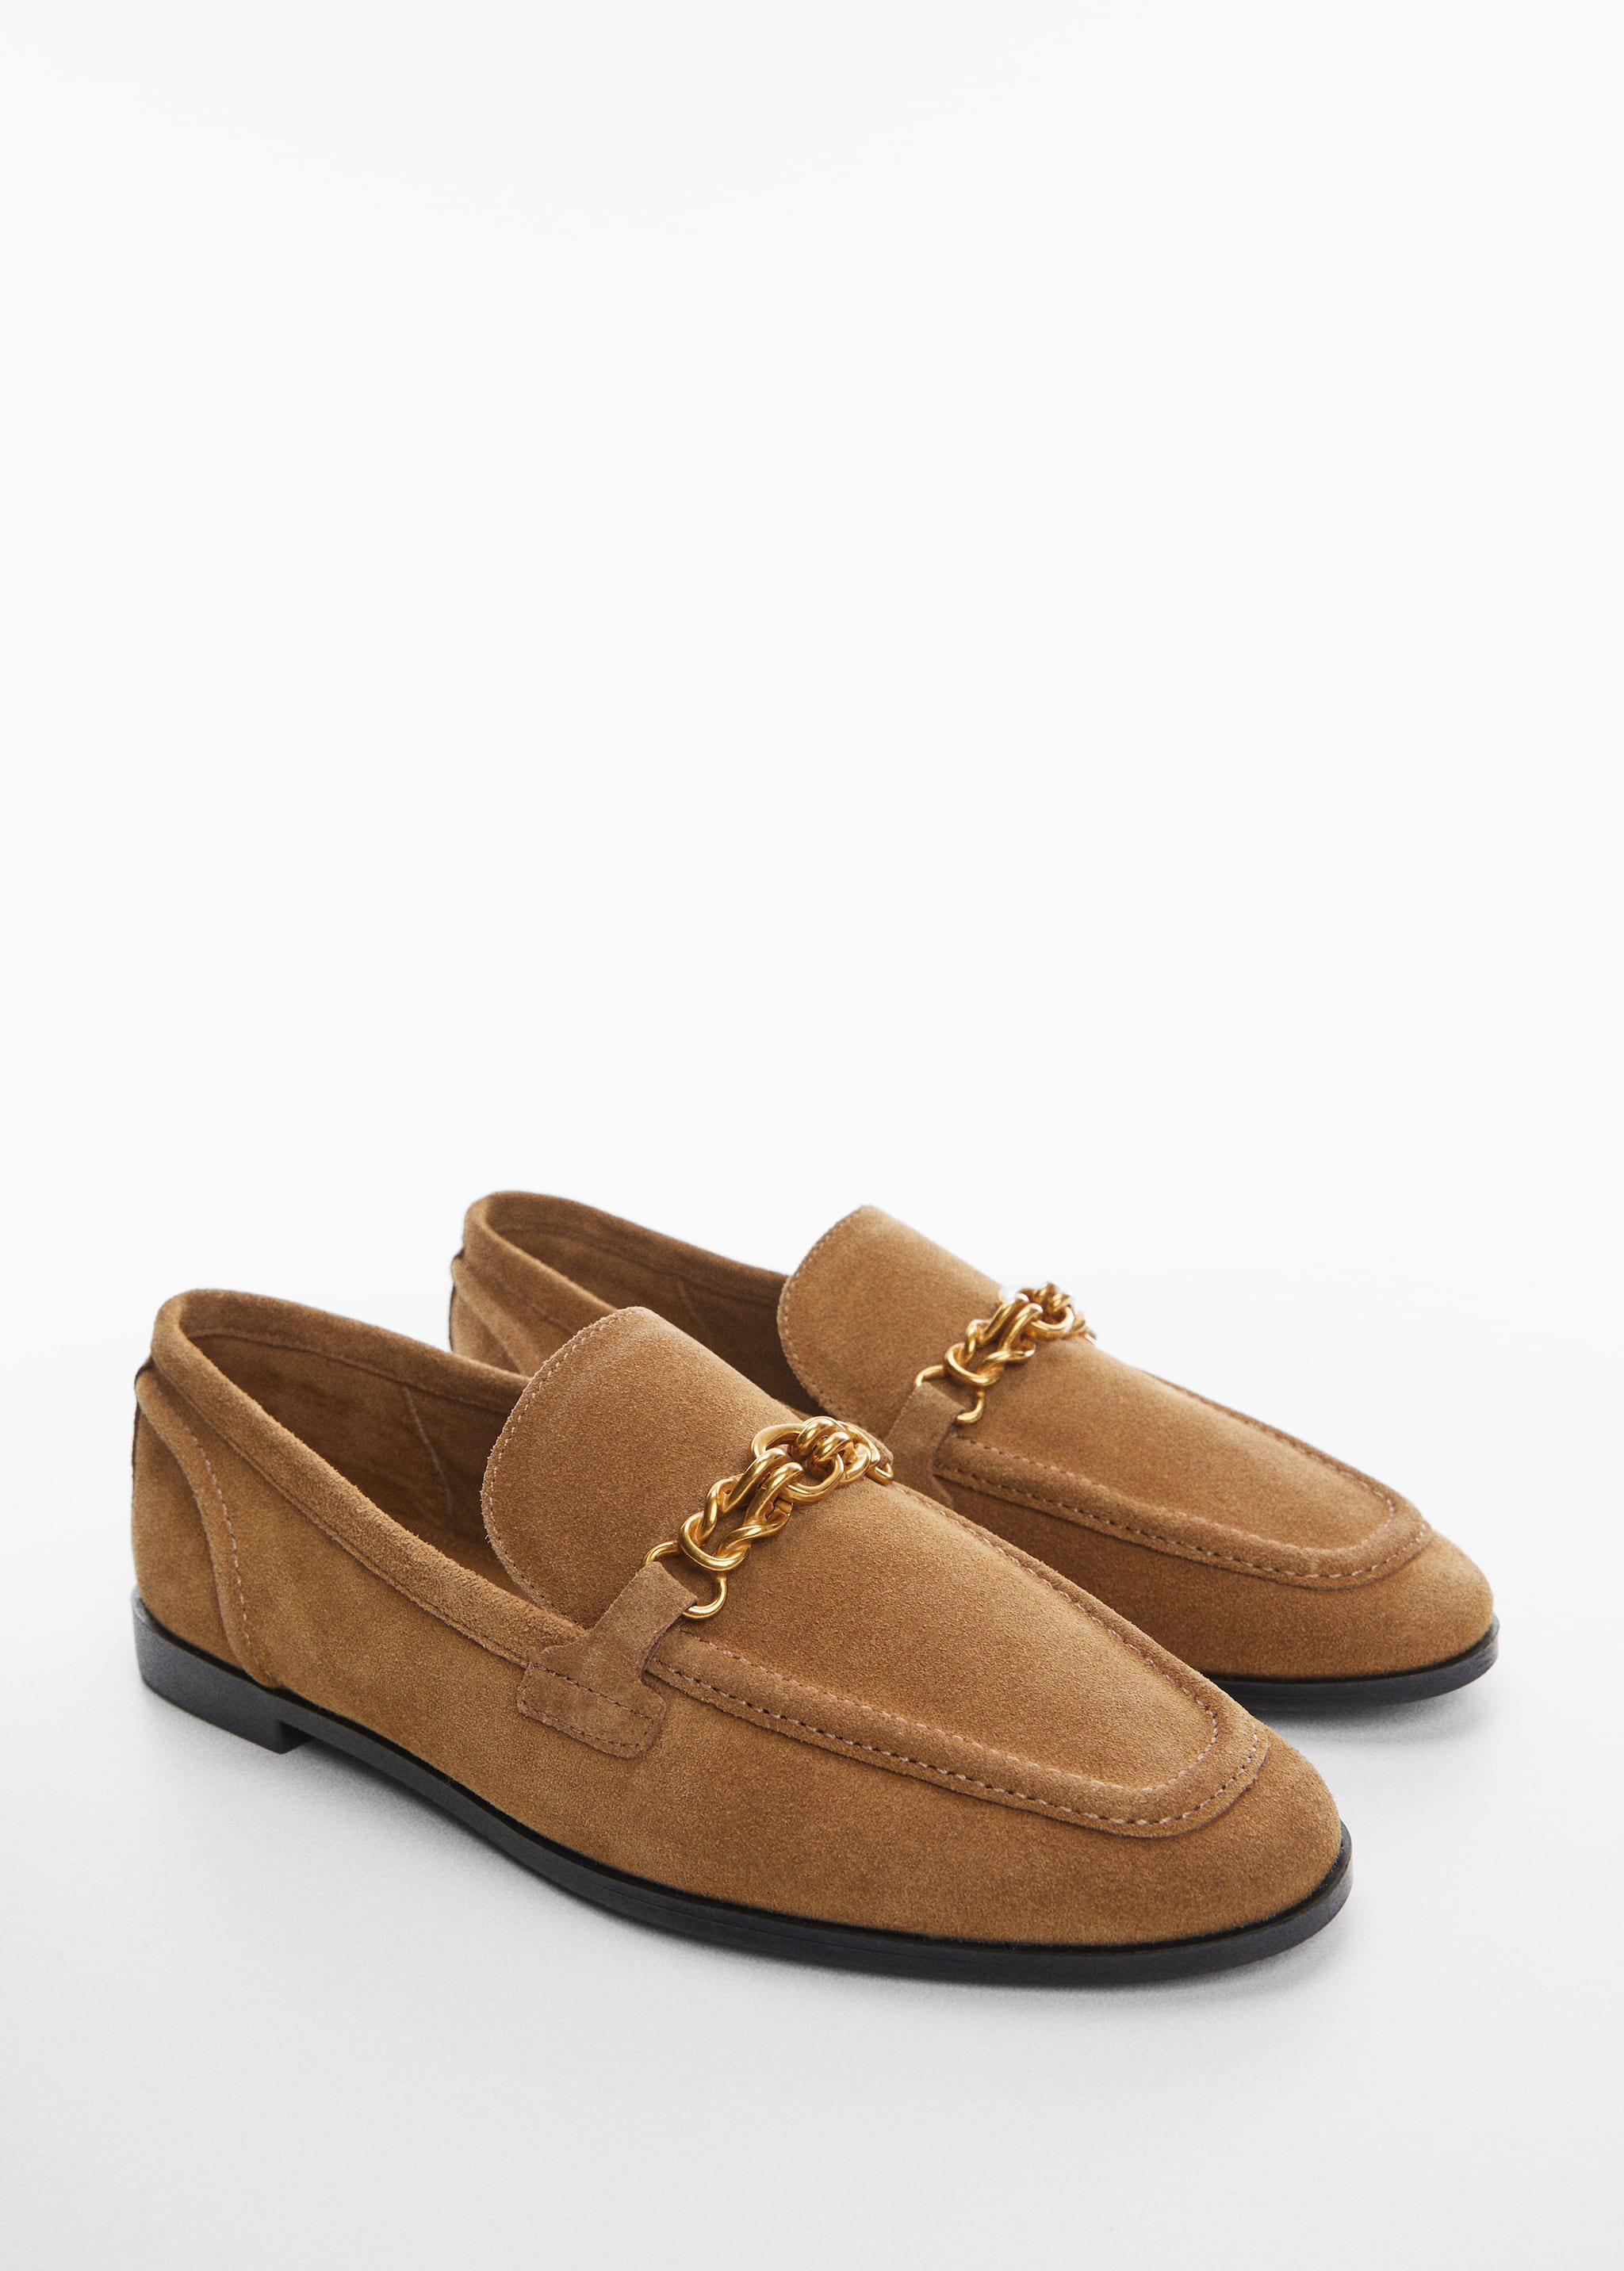 Leather loafers with chain - Medium plane